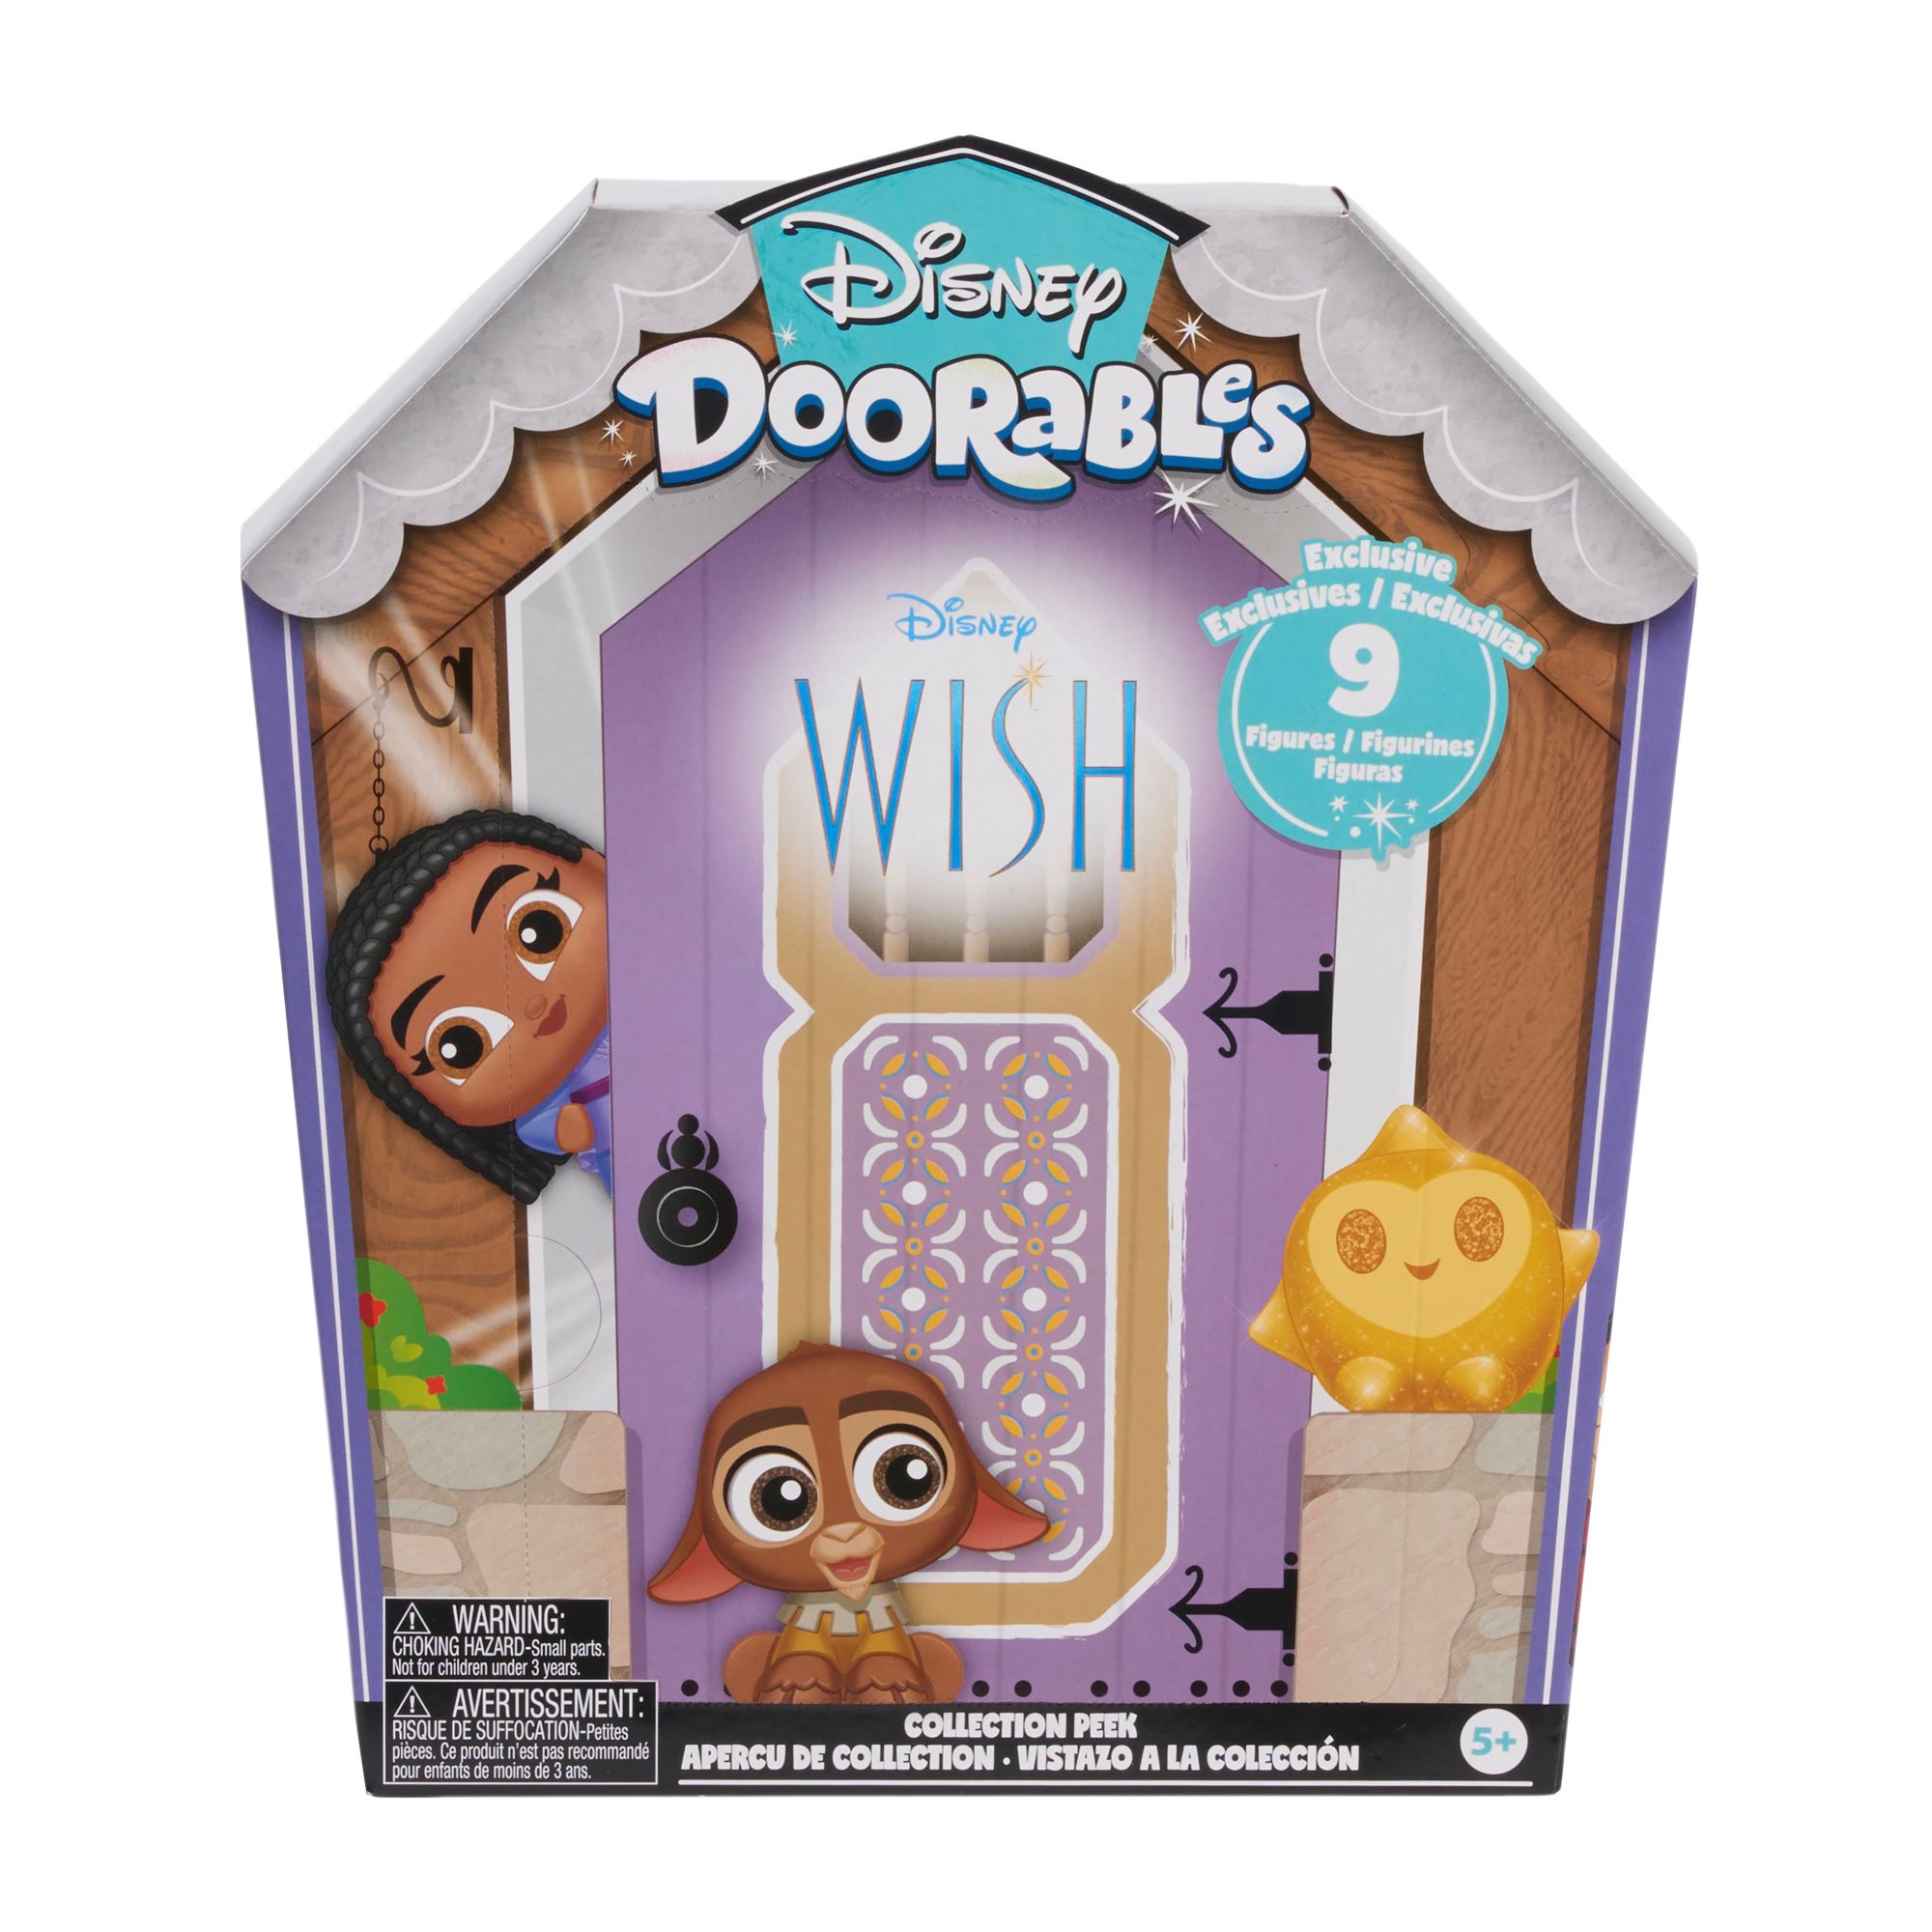 Dolls for Dolls! My First Look at Disney Doorables Series 10! Plus DIY  Movie Theater Display 